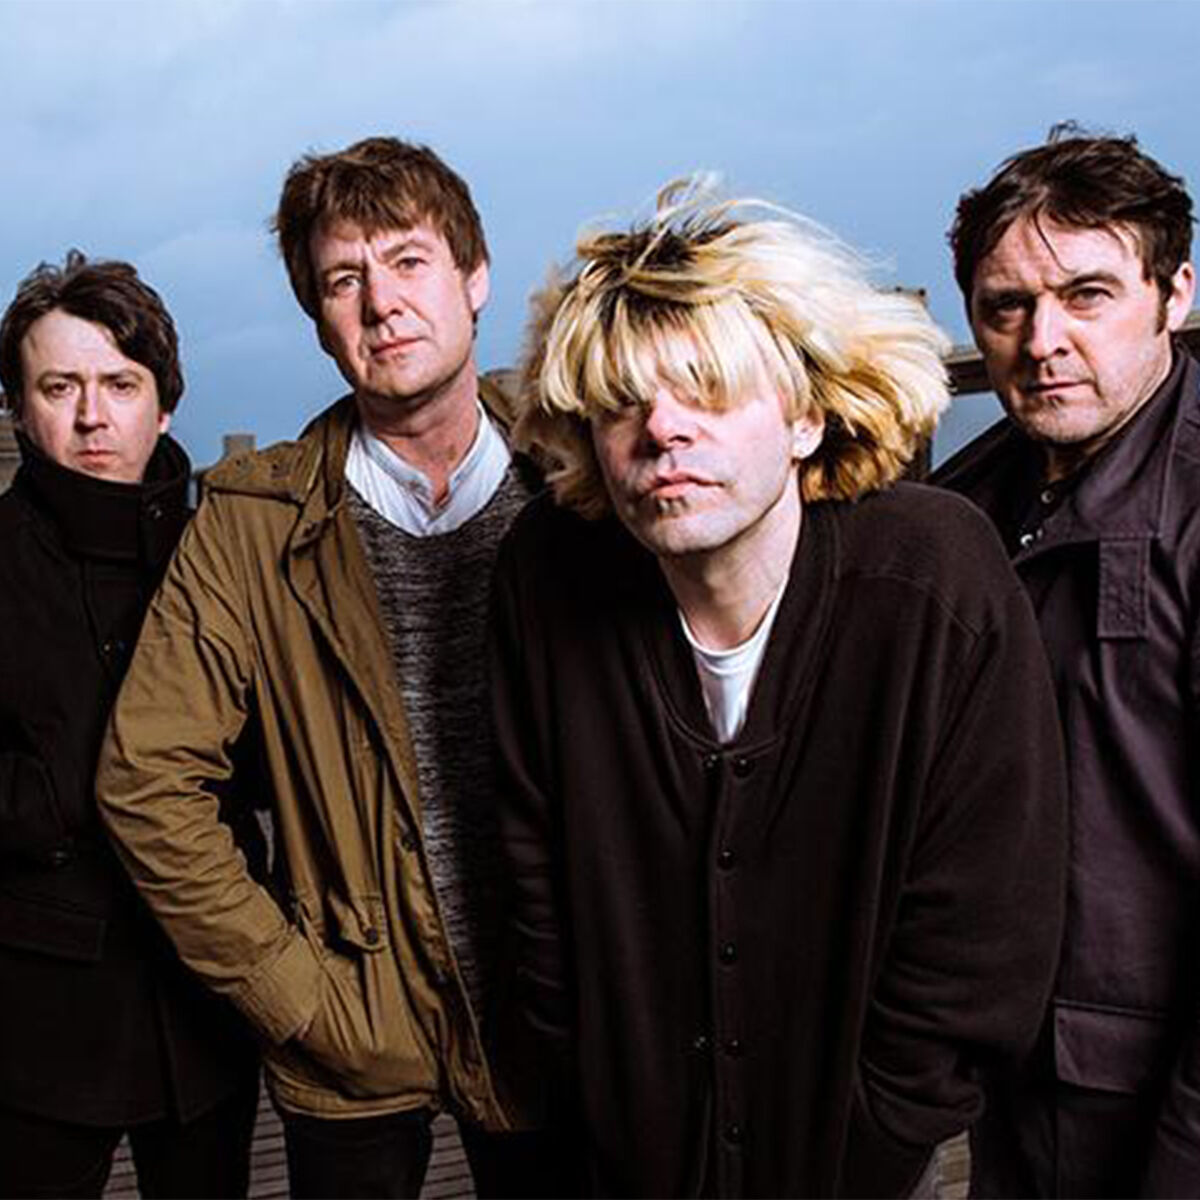 The Charlatans: albums, songs, playlists | Listen on Deezer